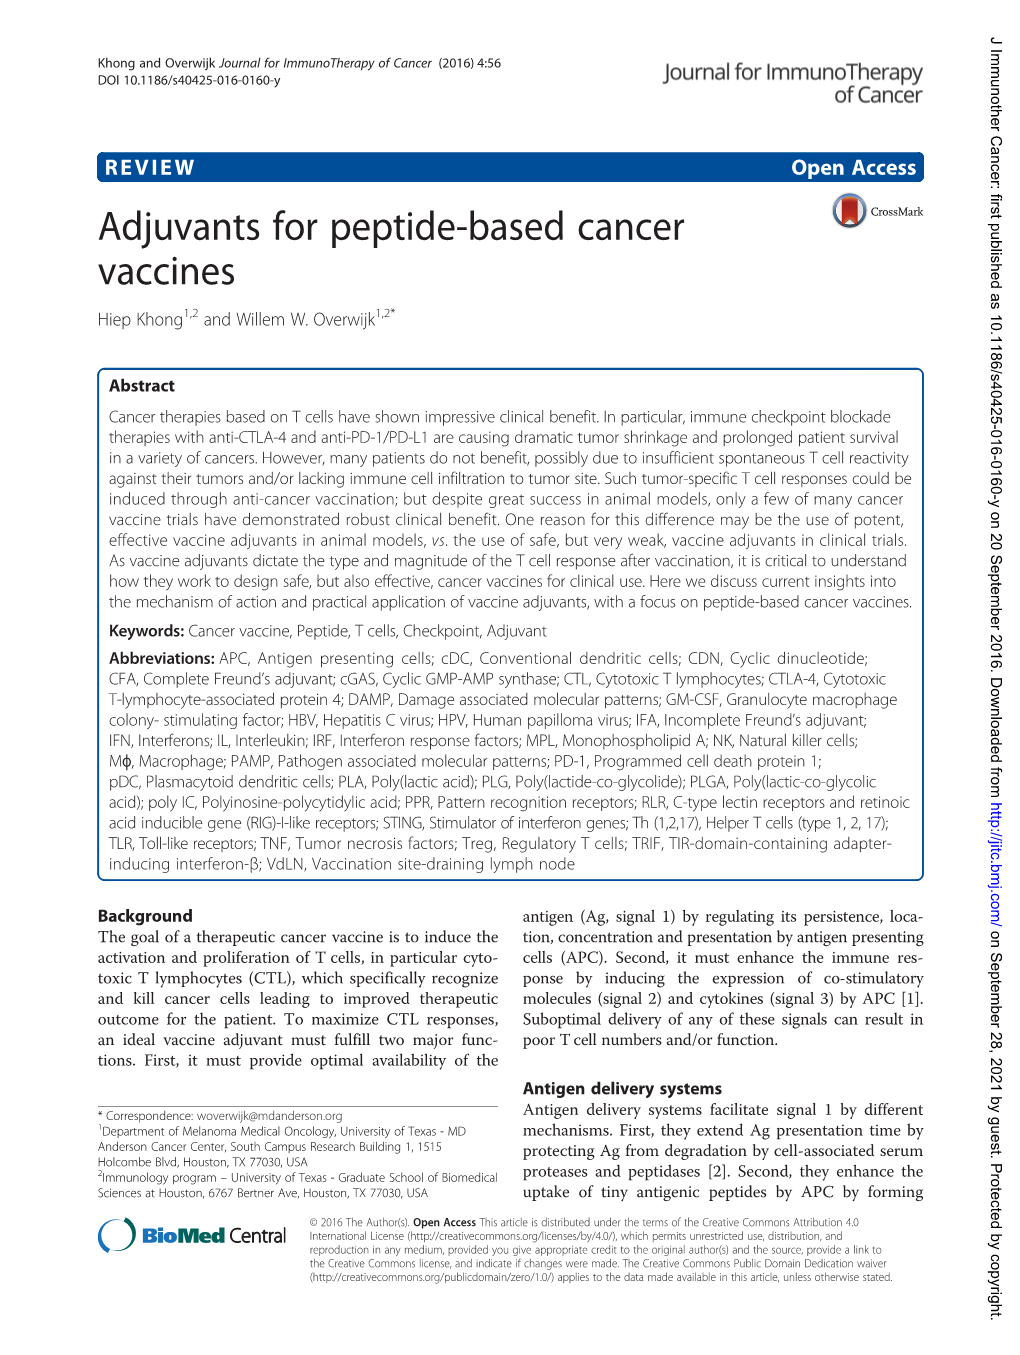 Adjuvants for Peptide-Based Cancer Vaccines Hiep Khong1,2 and Willem W